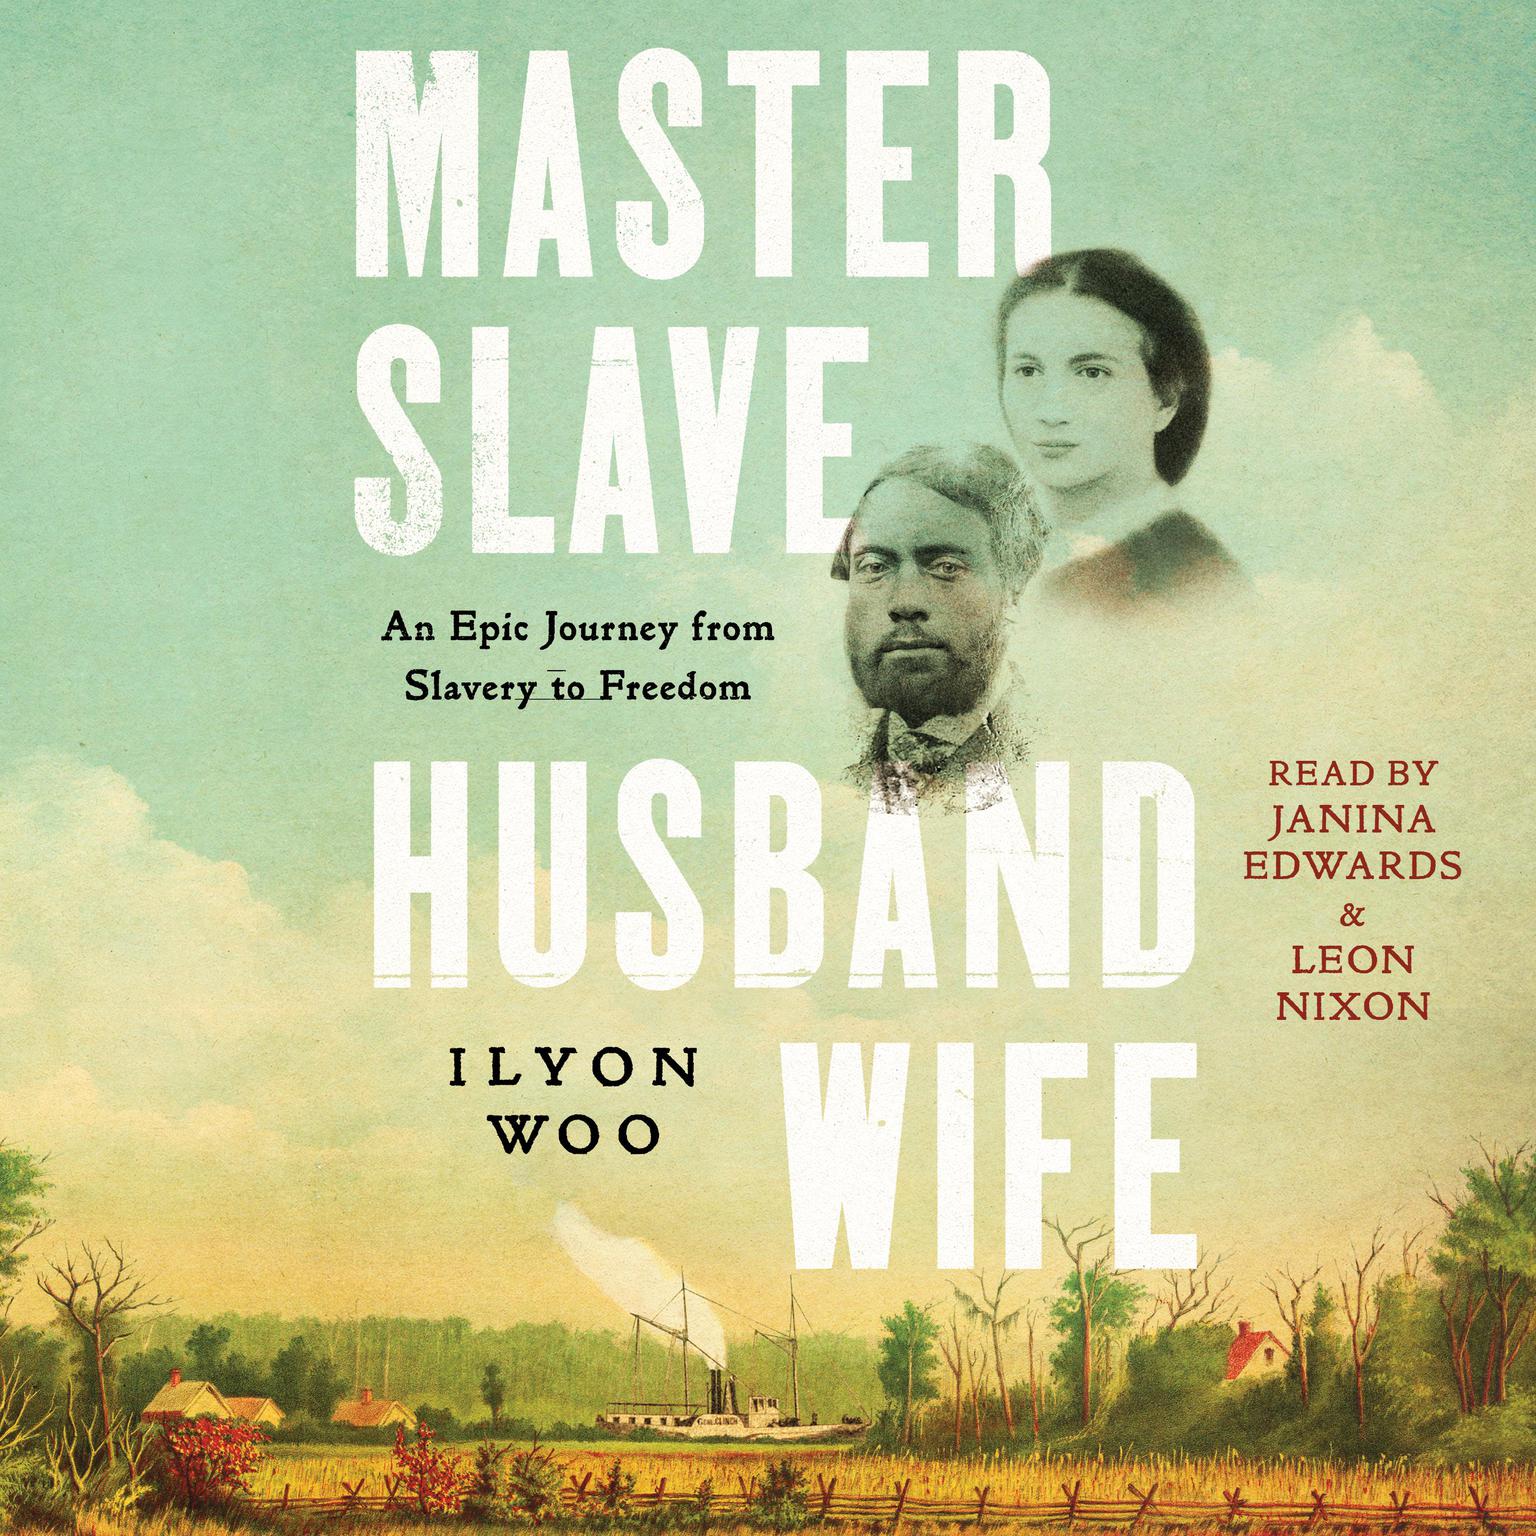 Master Slave Husband Wife: An Epic Journey from Slavery to Freedom Audiobook, by Ilyon Woo